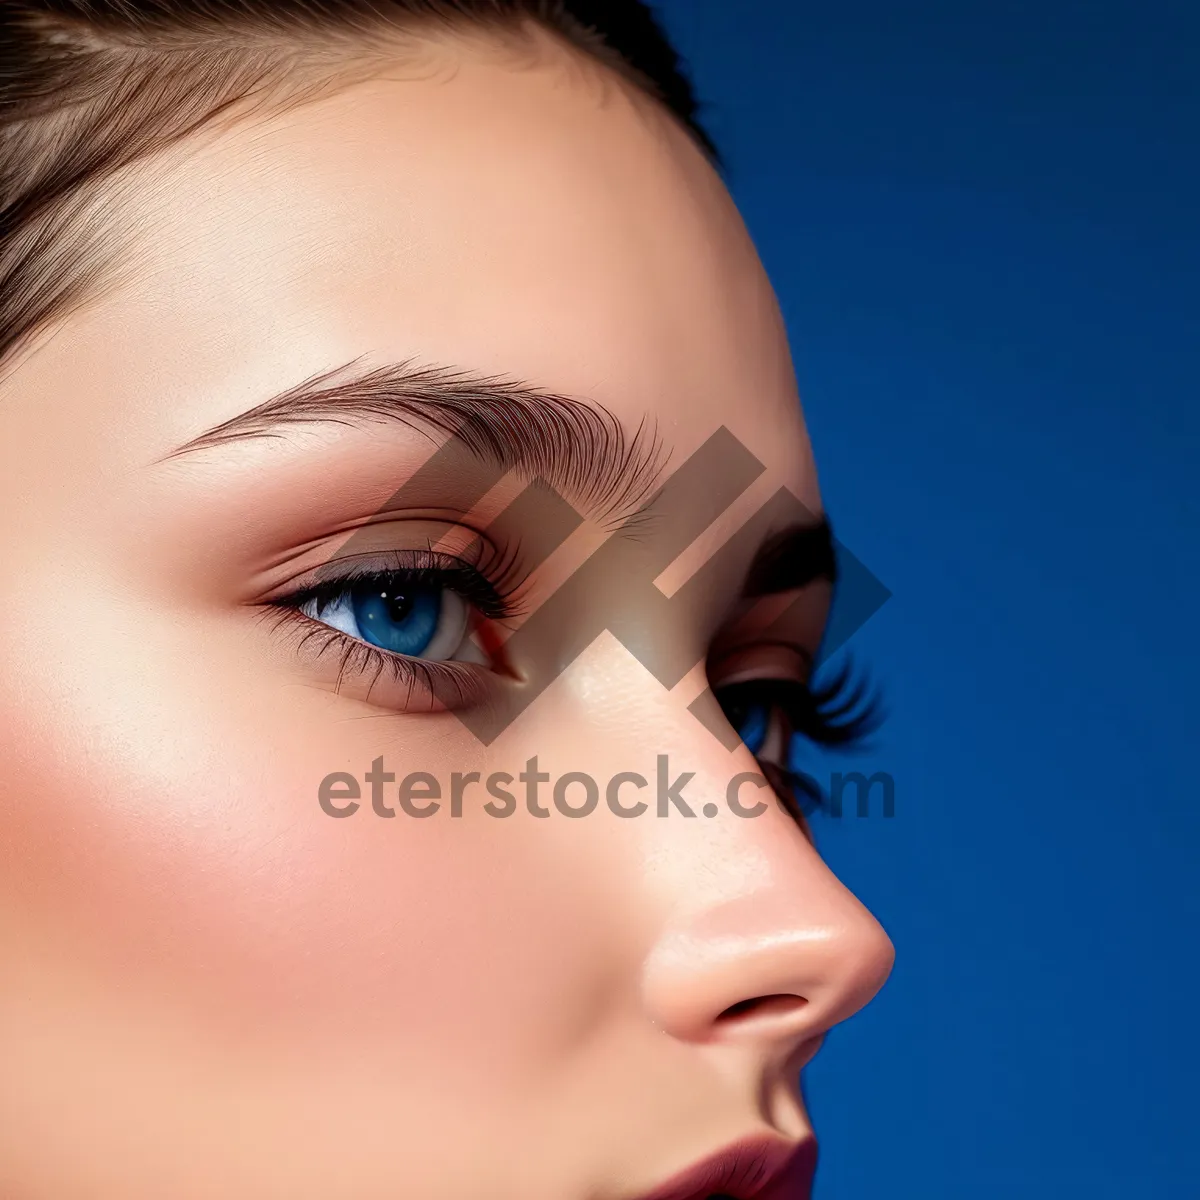 Picture of Flawless Beauty: Close-up Portrait of an Attractive Model